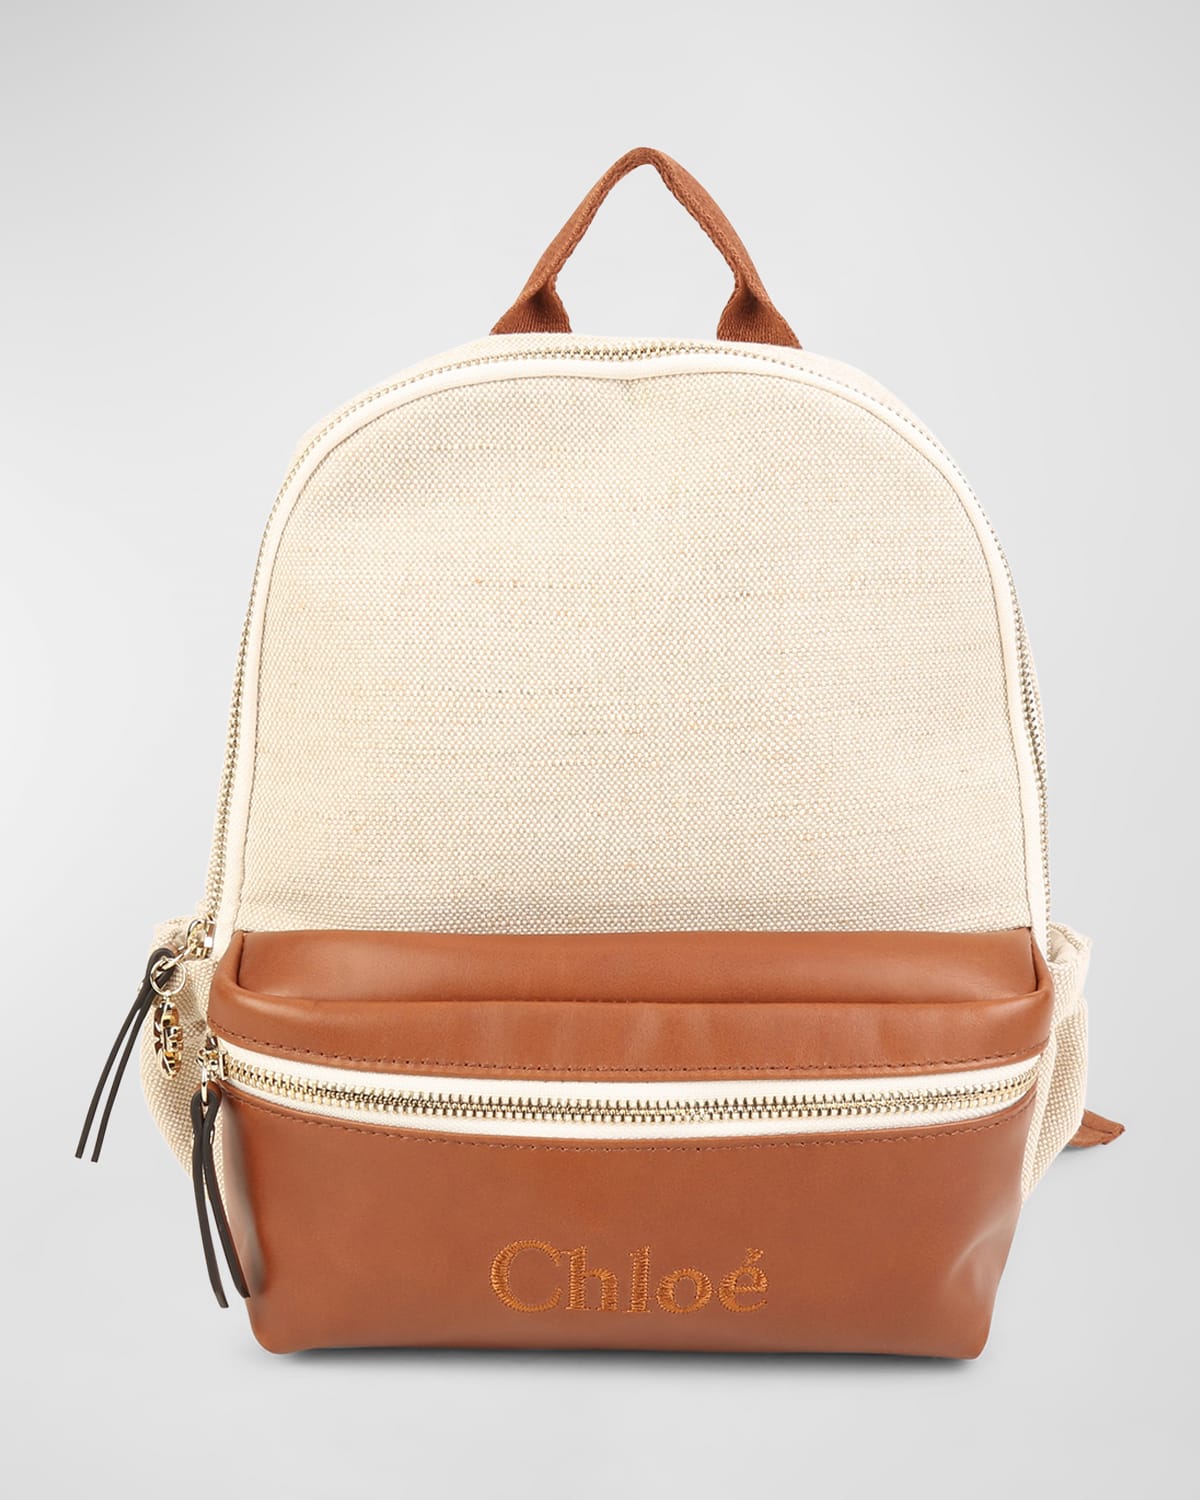 Chloé Kids' Girl's Canvas And Leather Backpack In Brown